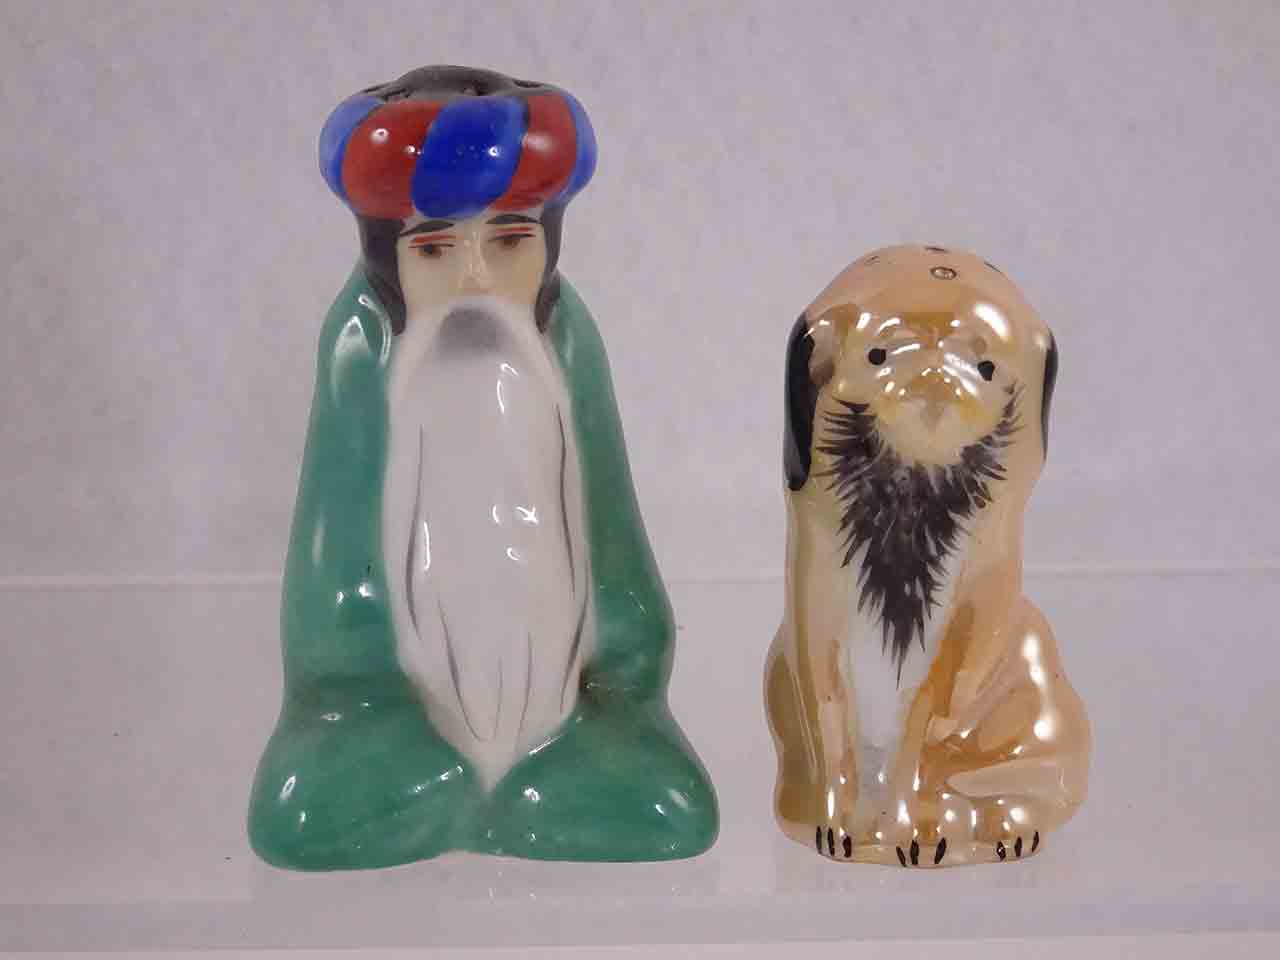 Lusterware Middle Eastern / Arab man with bearded dog from France salt and pepper shakers